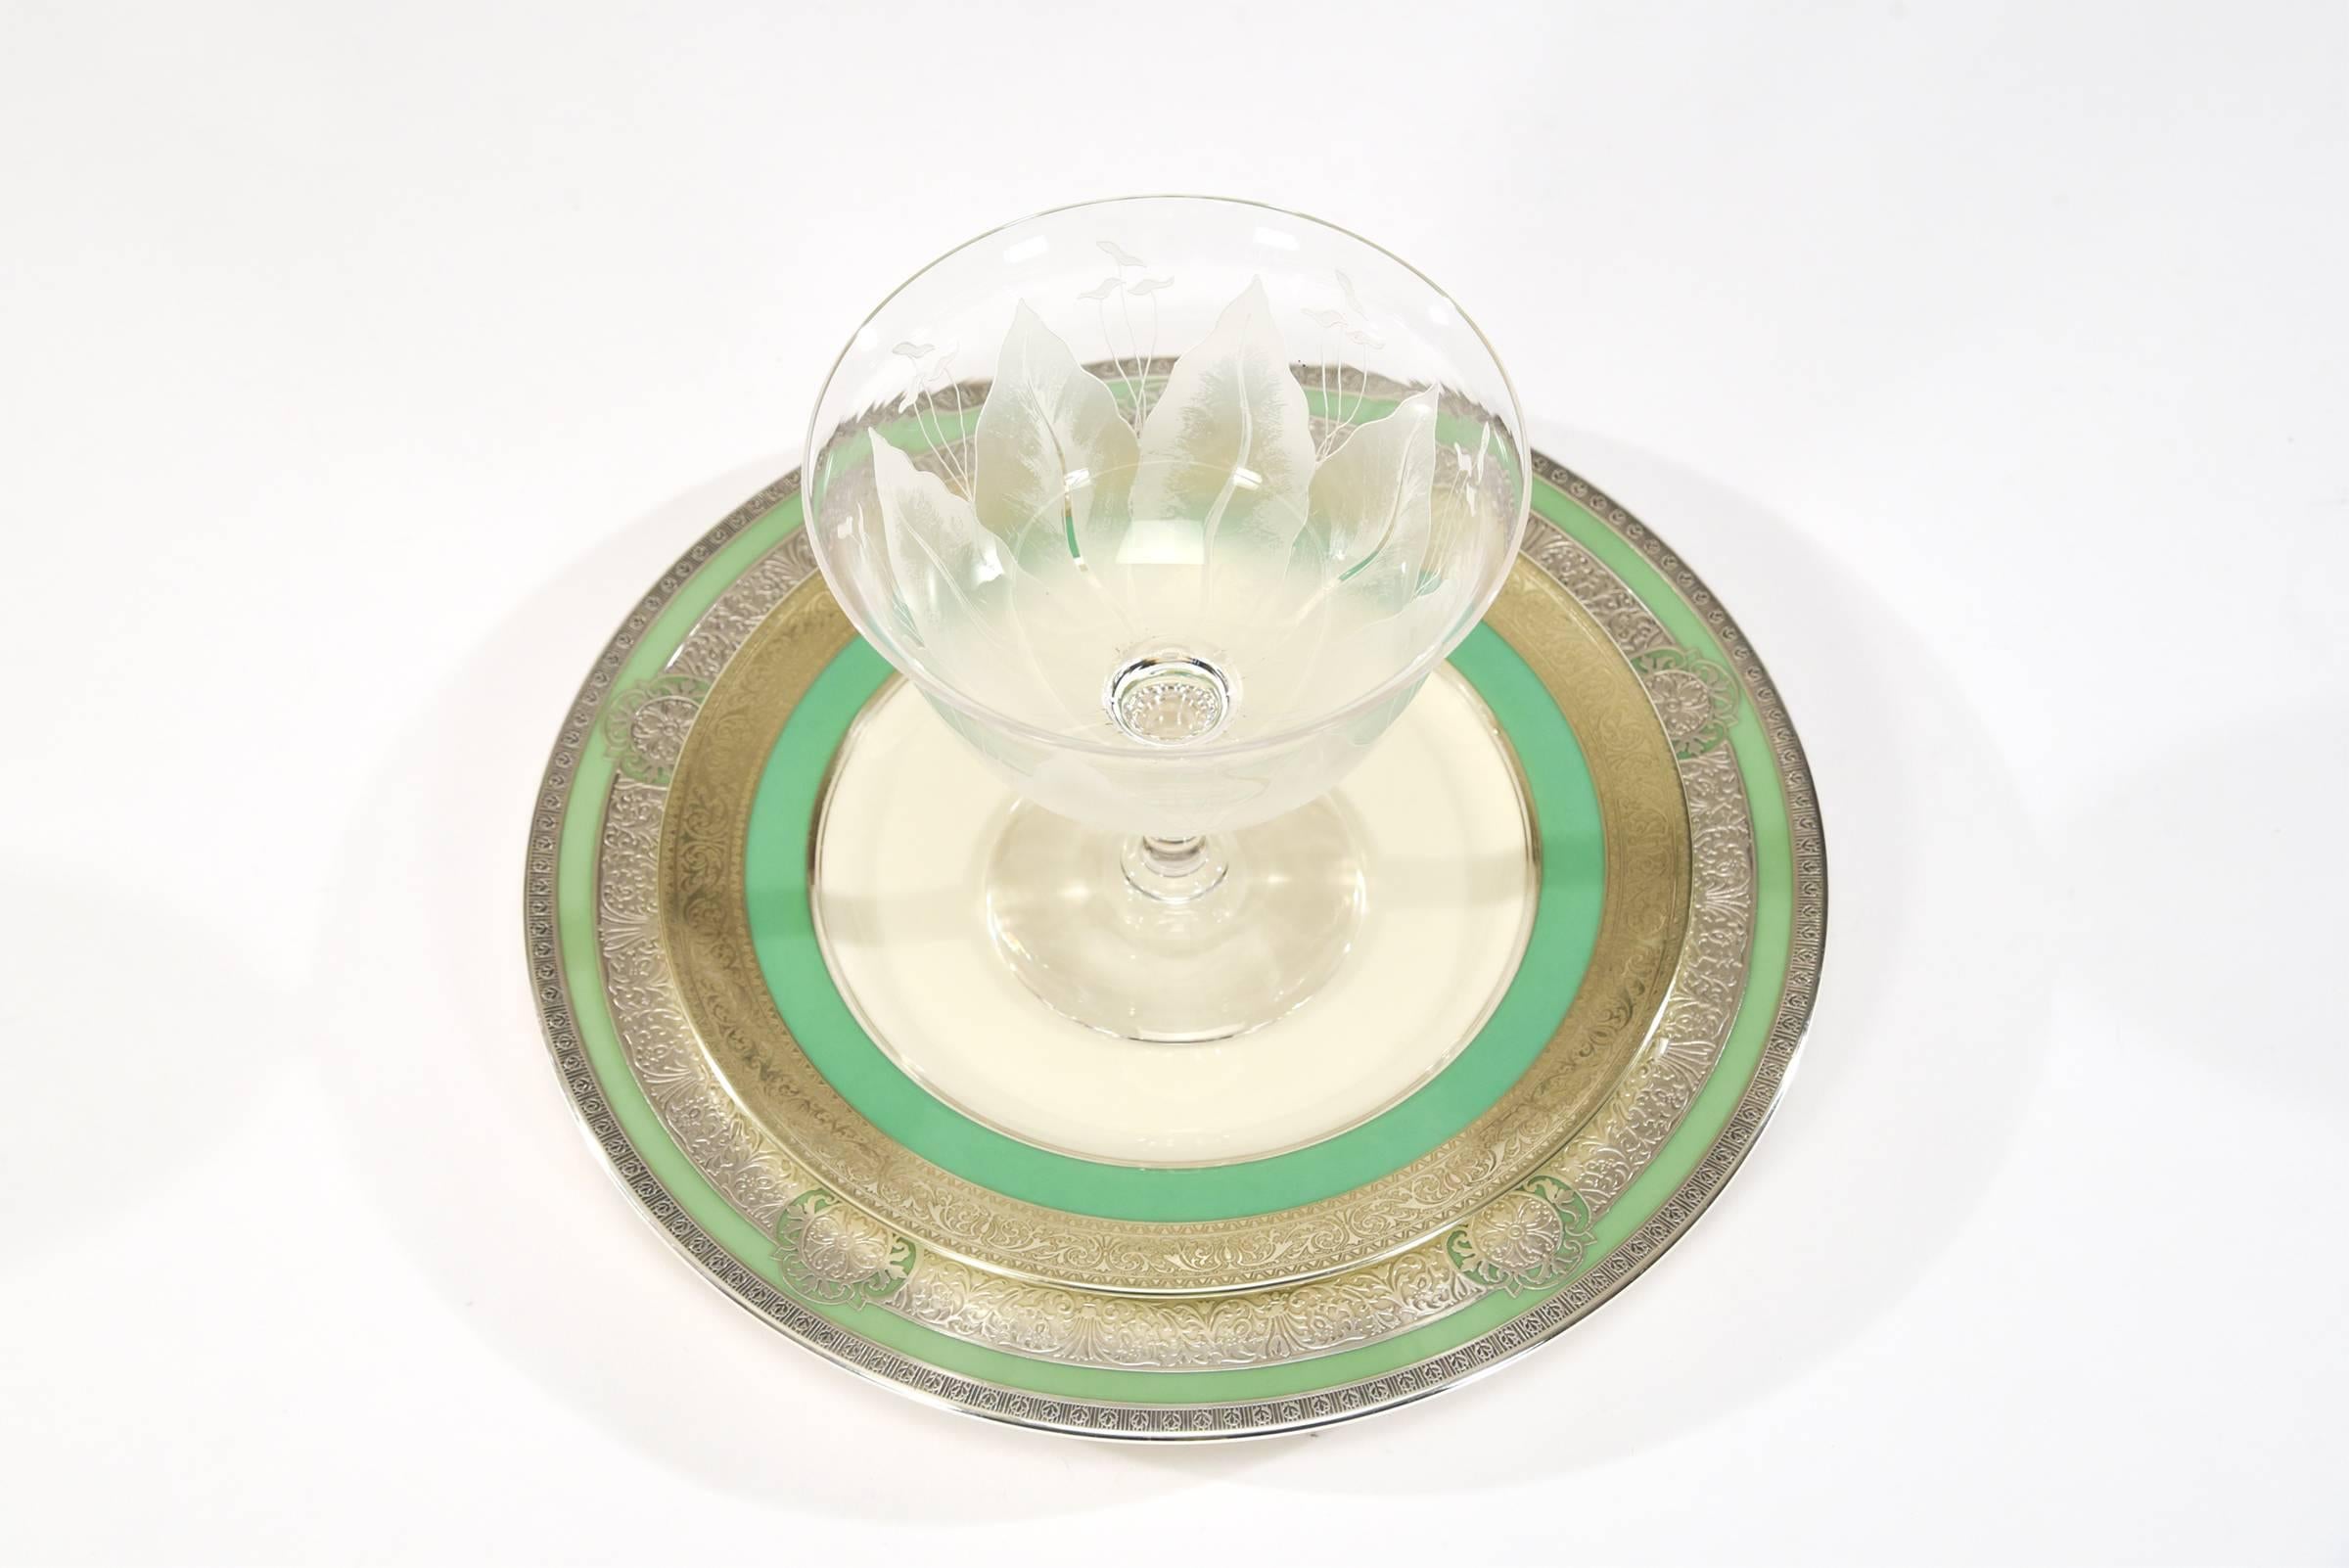 Silvered Set of 12 Lenox Green & Ivory Dessert Plates with Silver Overlay Borders, 1920s